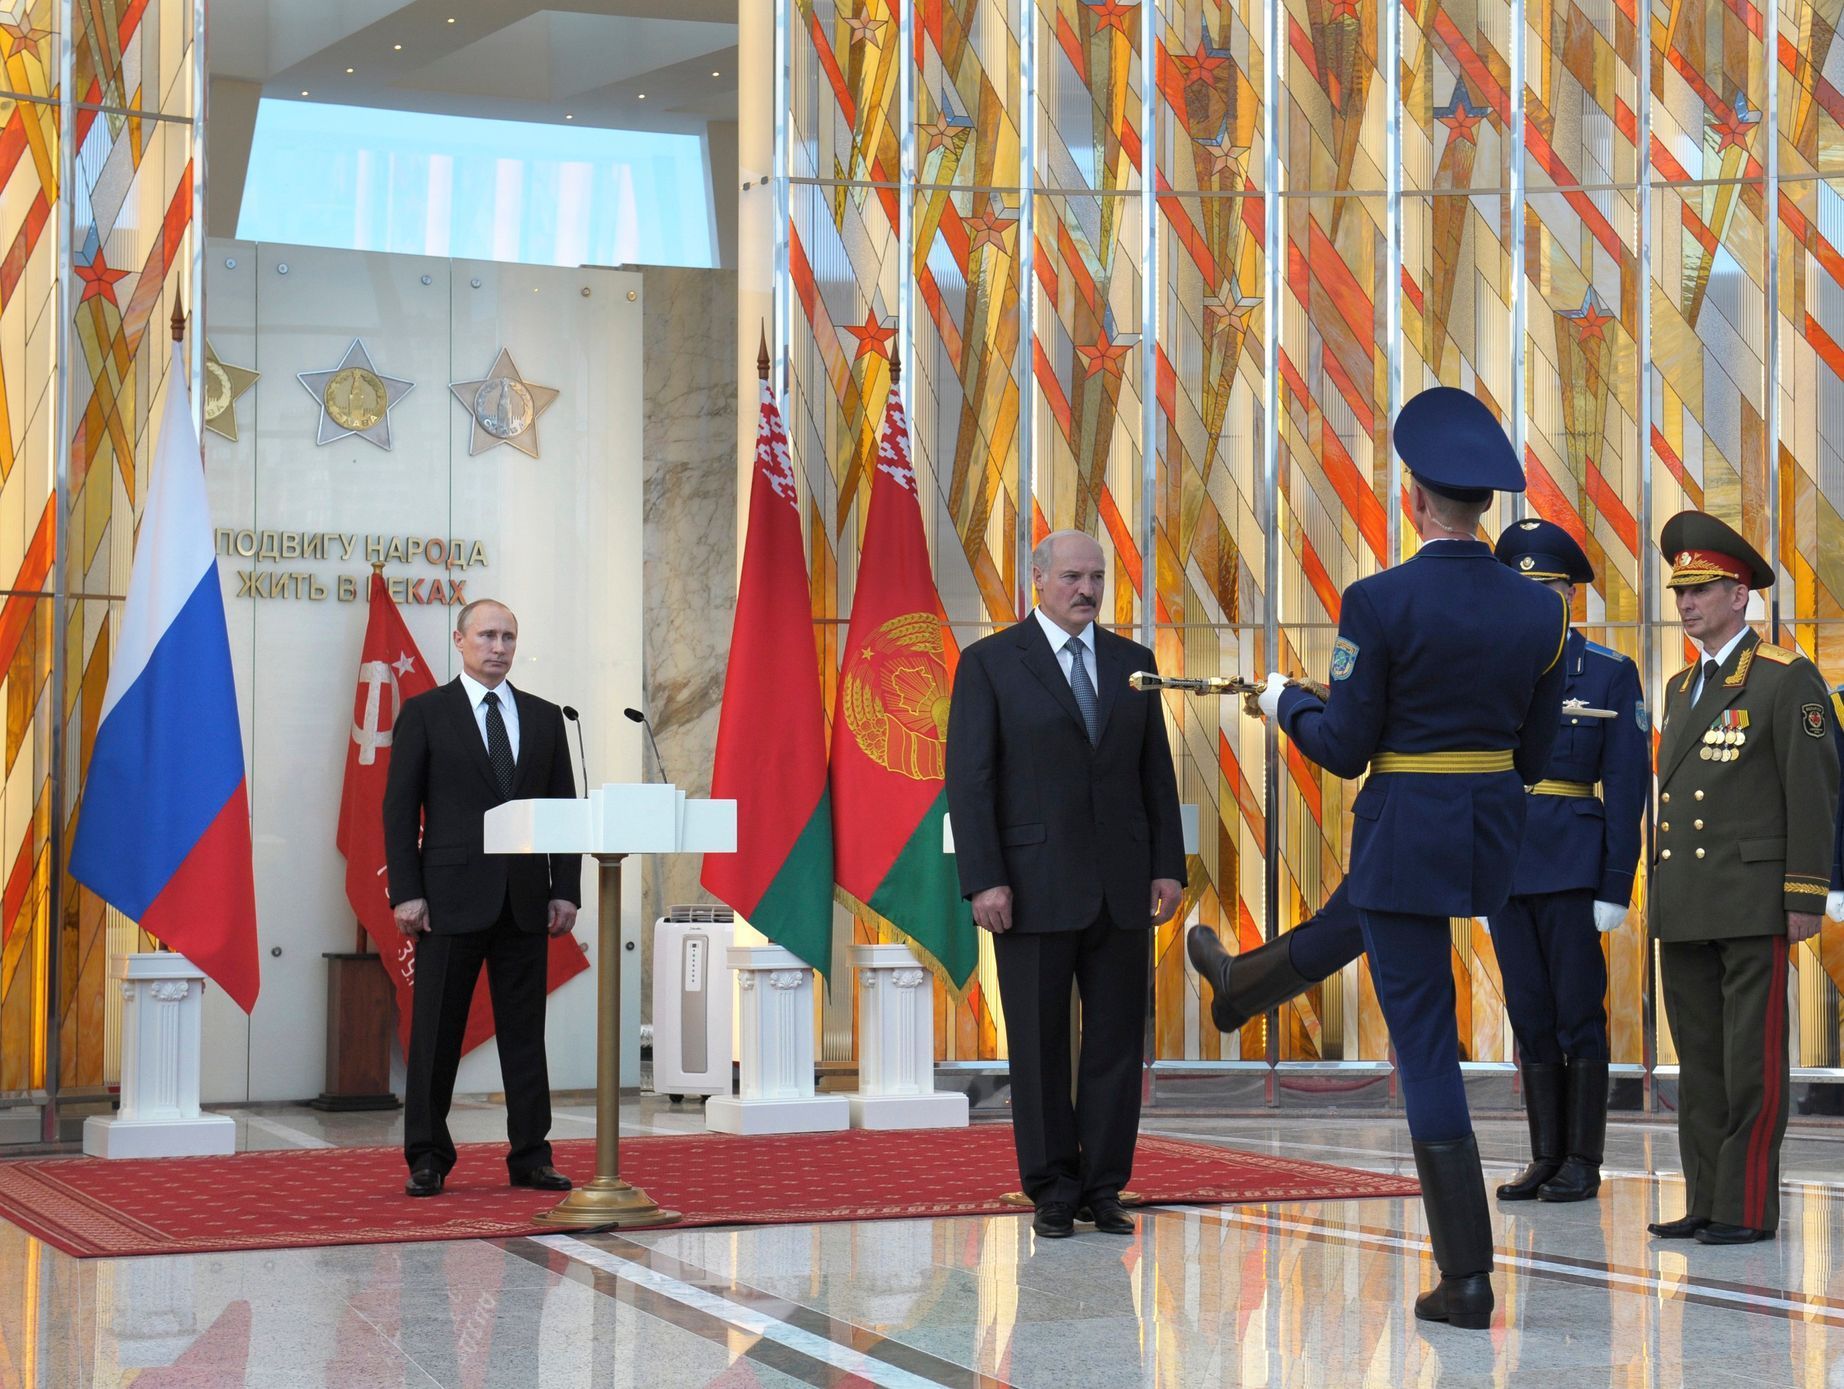 Russia's President Putin and Belarus' President Lukashenko take part in a ceremony to mark the 70th anniversary of the liberation of Belarus from Nazi occupation, at the Belarusian State Museum of the